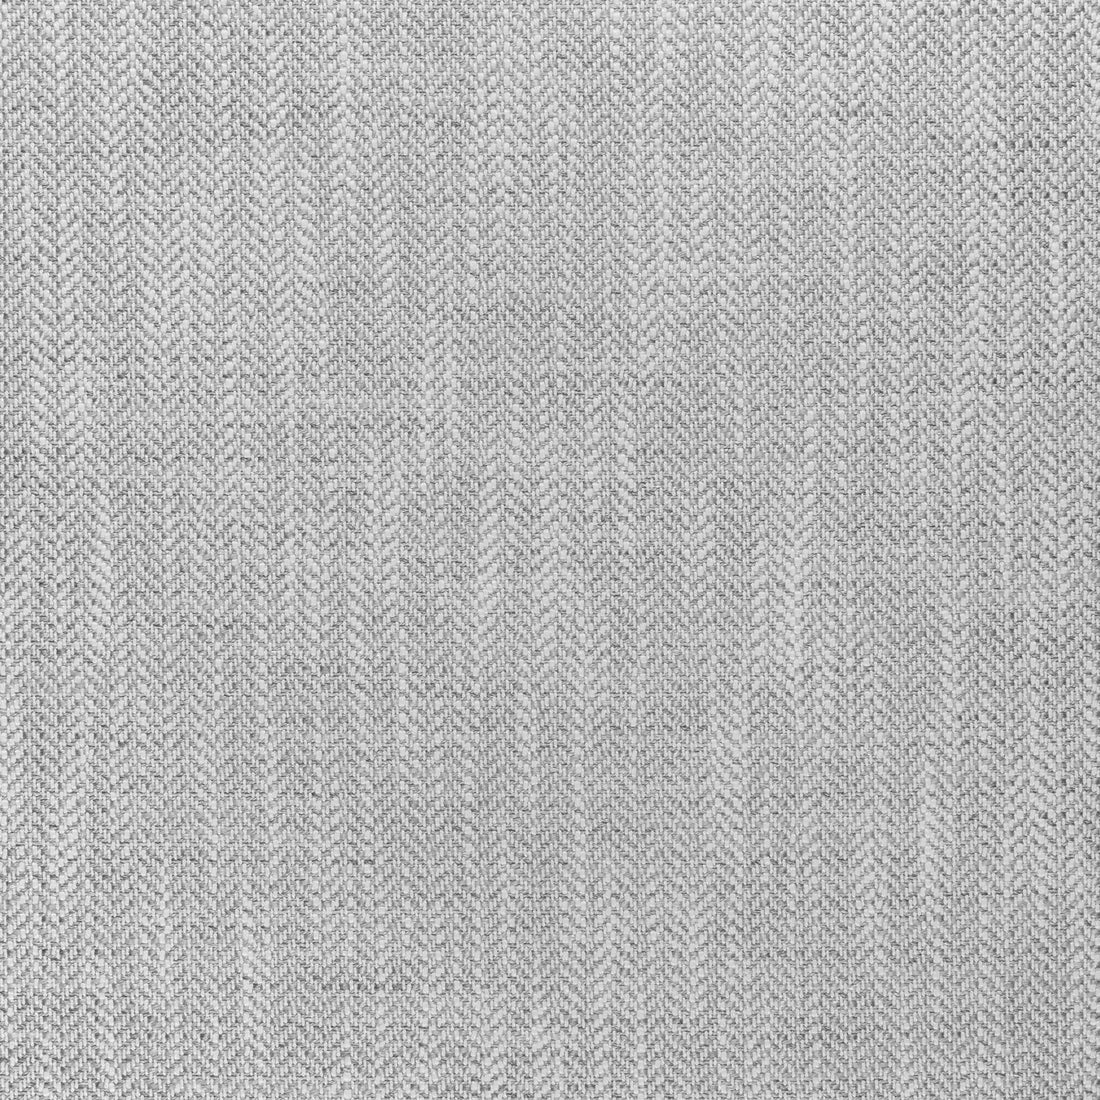 Ashbourne Tweed fabric in sterling grey color - pattern number W80606 - by Thibaut in the Pinnacle collection